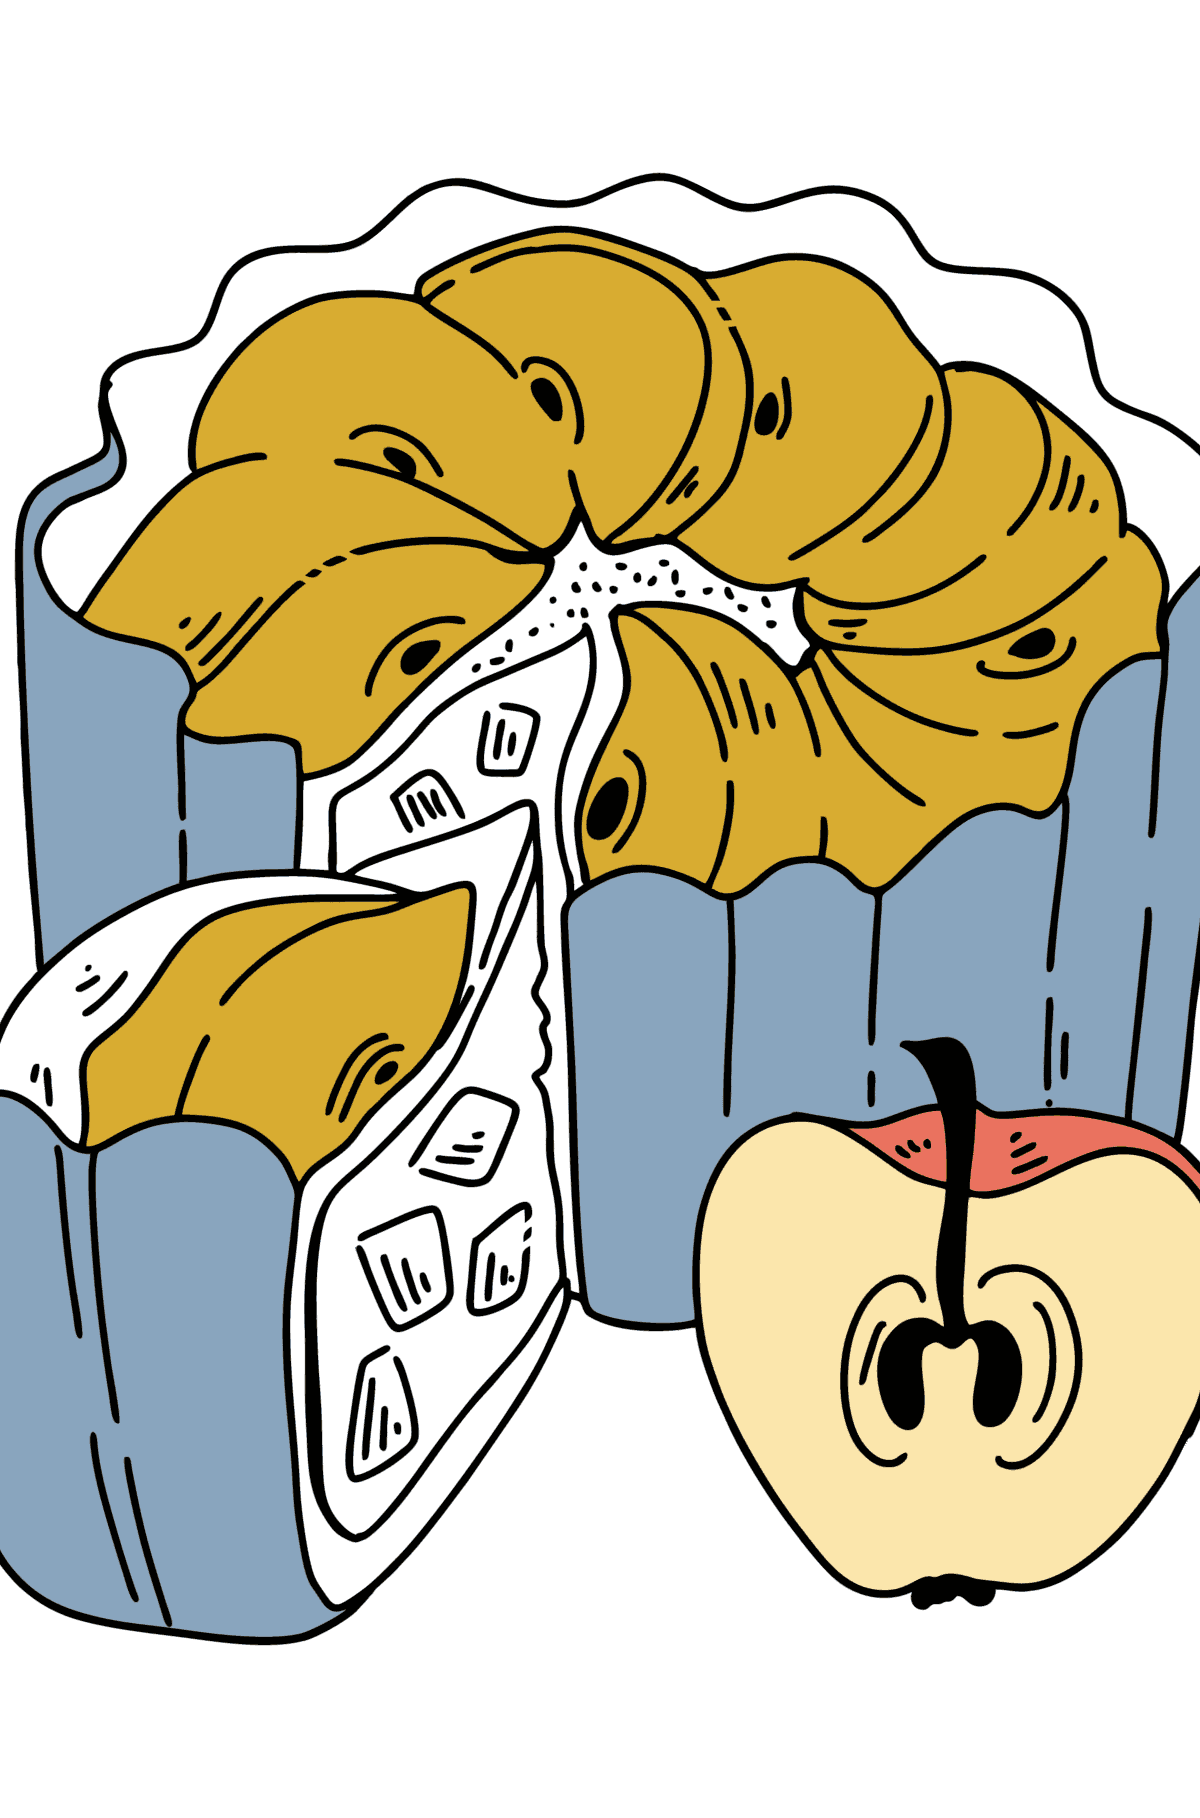 Coloring page - Apple Pie, Charlotte - Coloring Pages for Kids